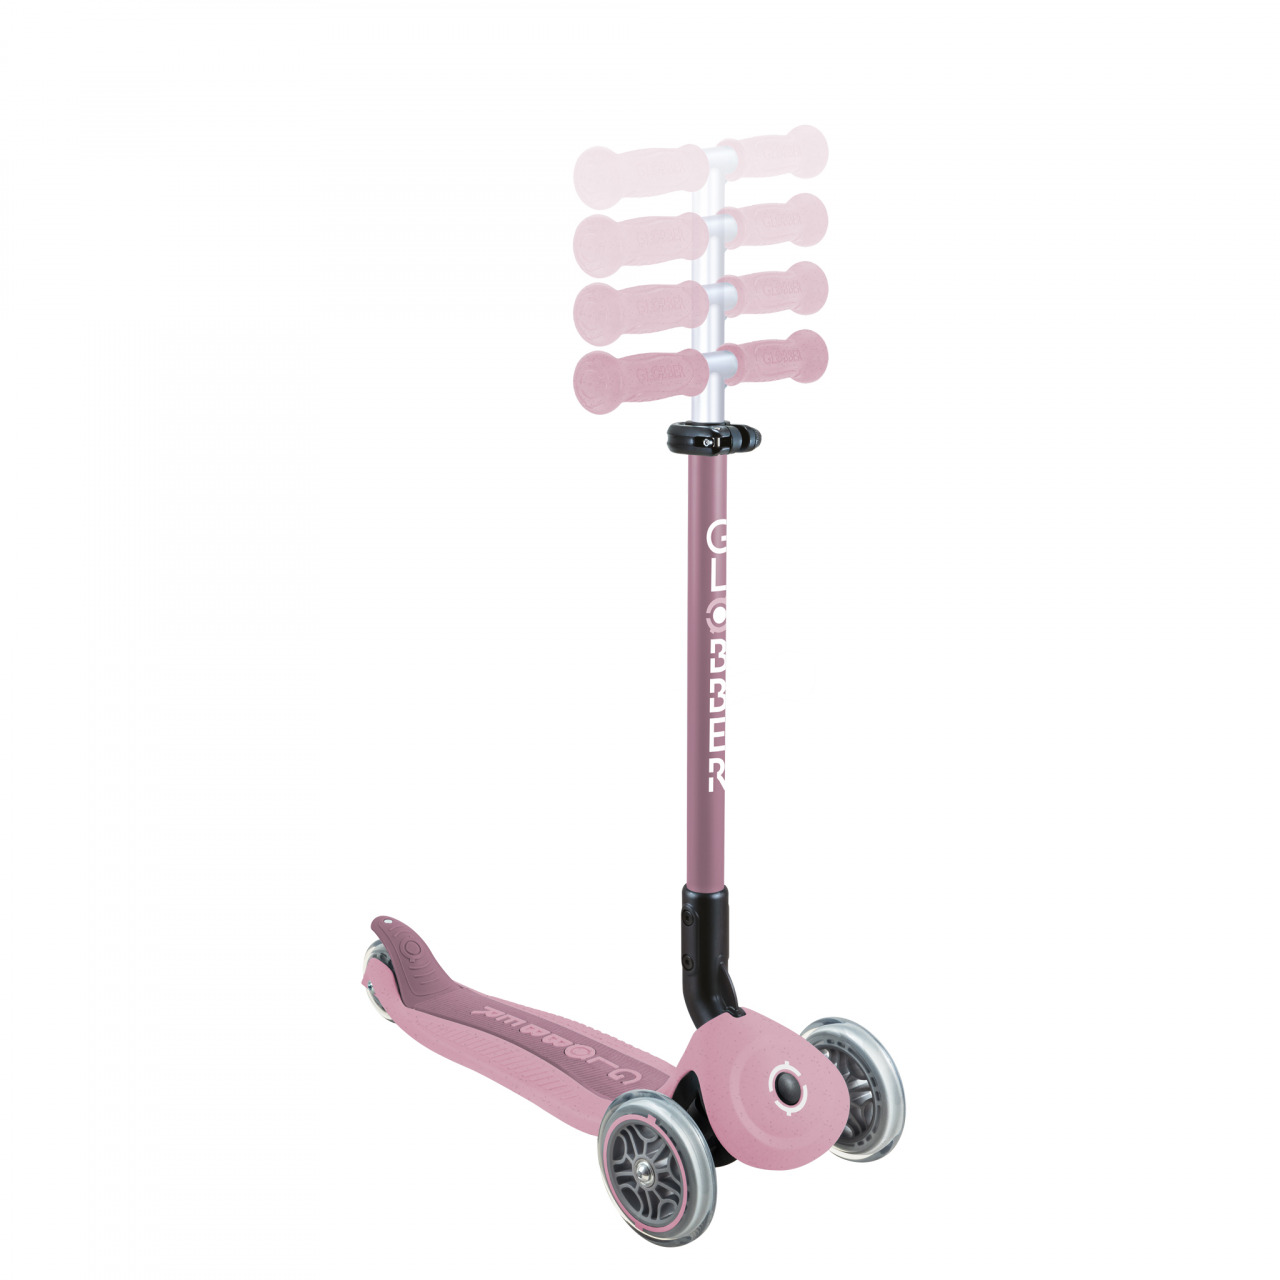 740 510 Adjustable Eco Scooter